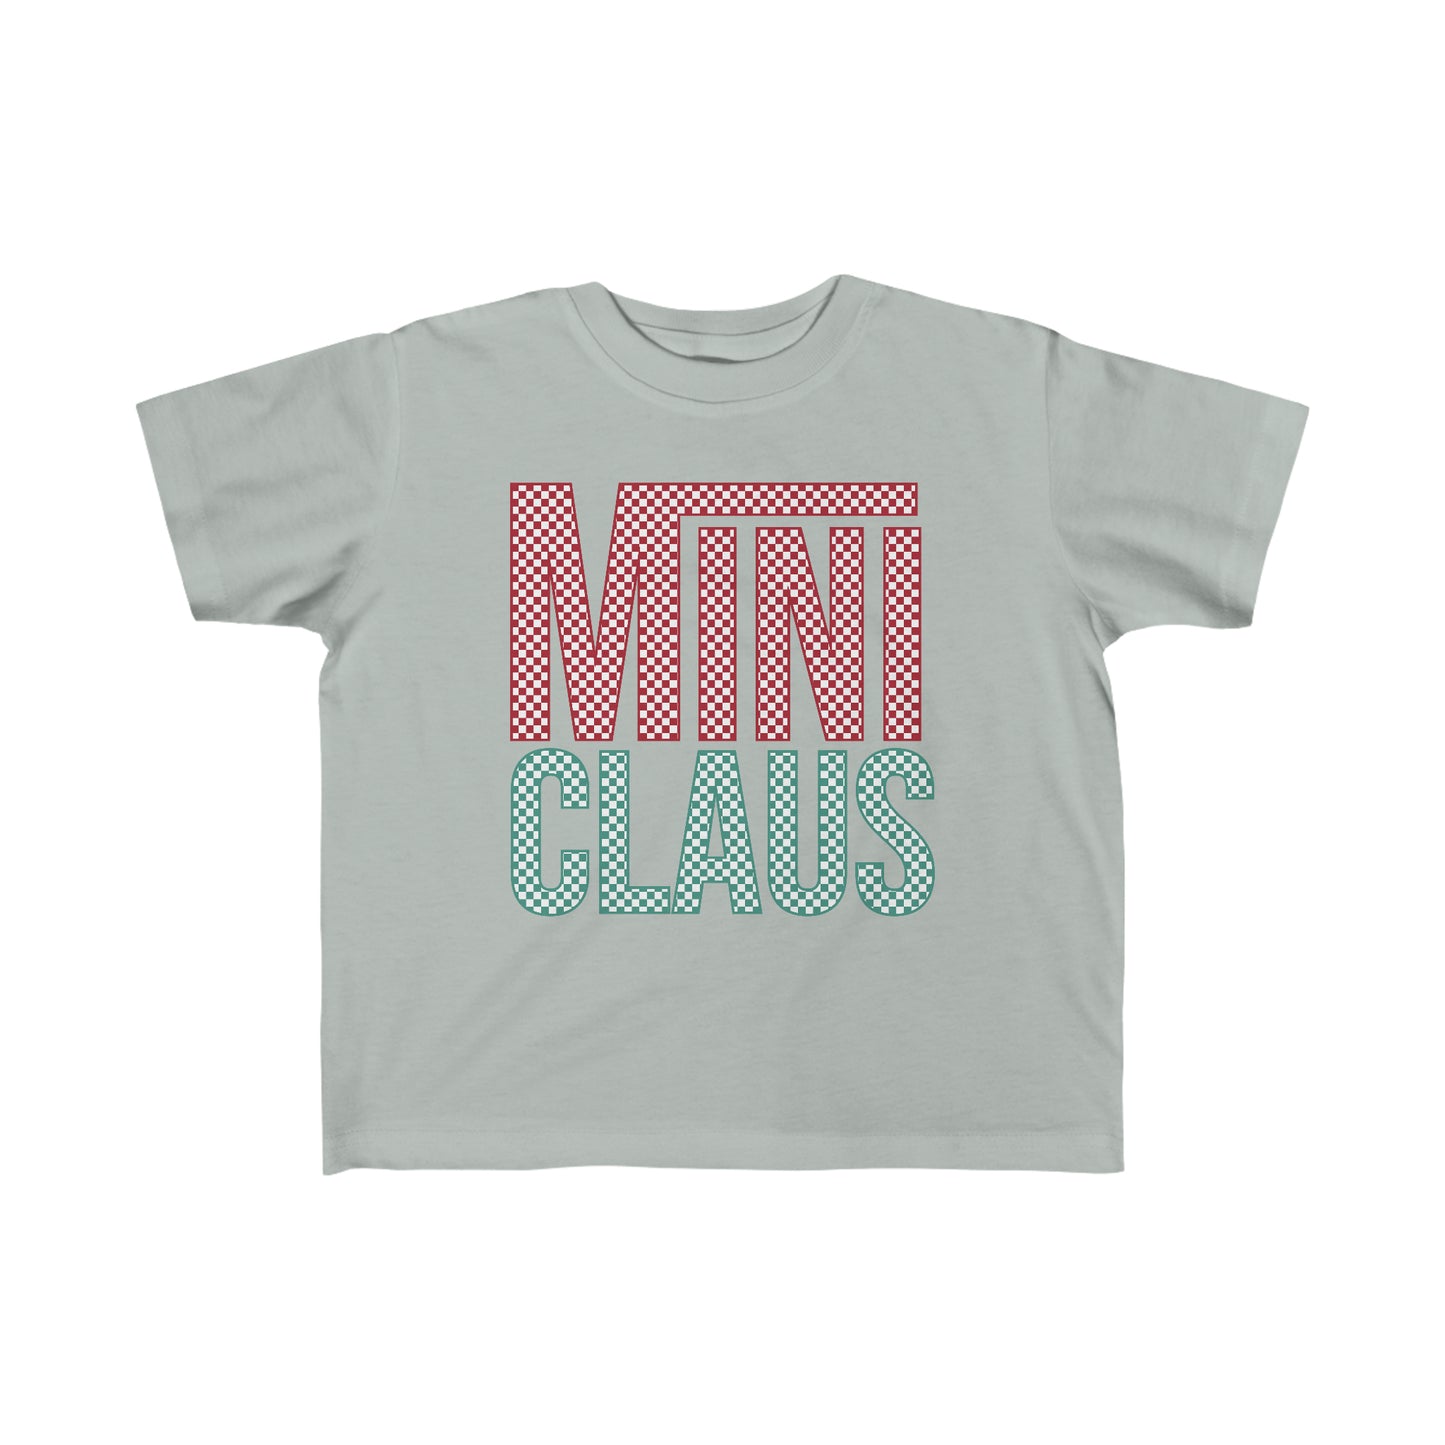 Mini Claus Toddler's Fine Jersey Tee